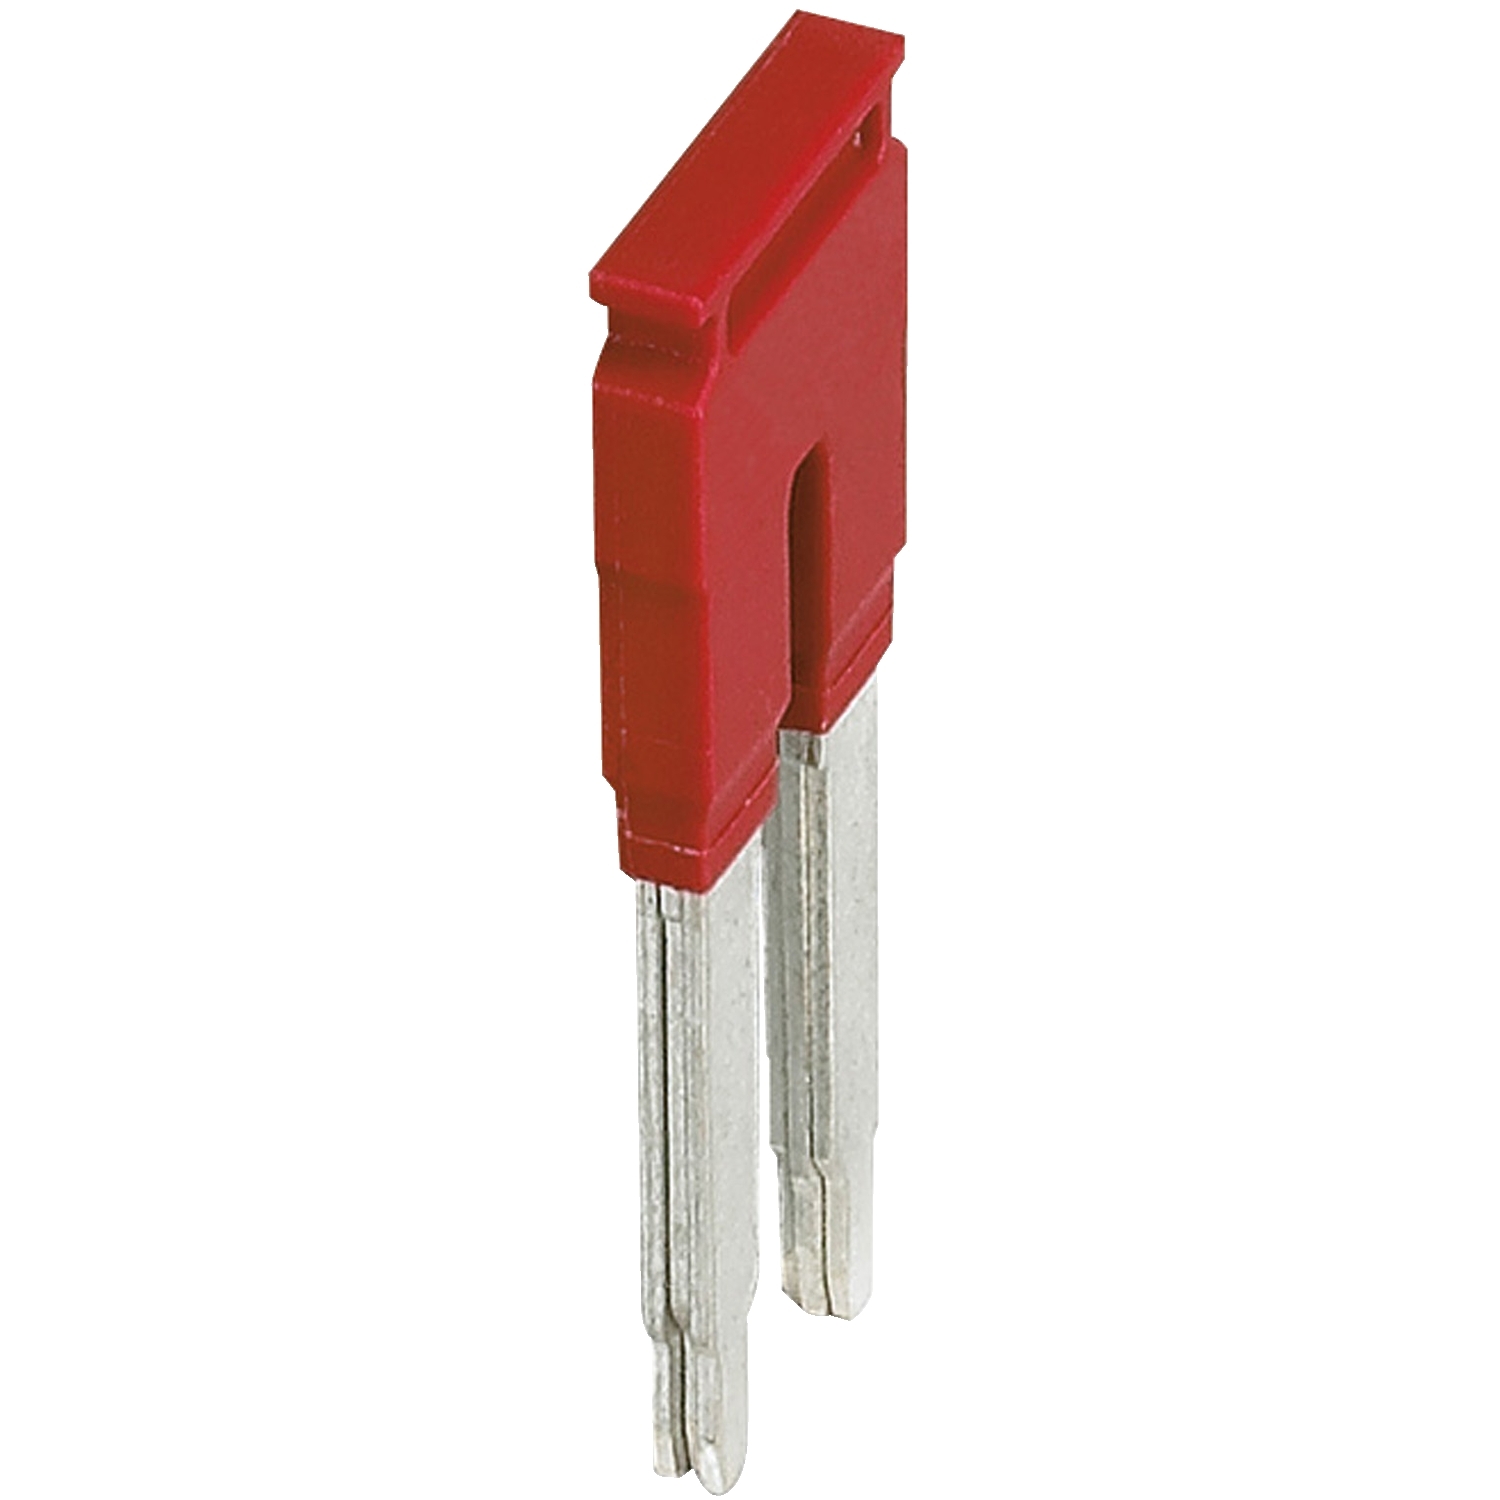 Plug-in bridge, Linergy TR, 2 points, for 10mm² terminal blocks, 2 way, red, set of 10